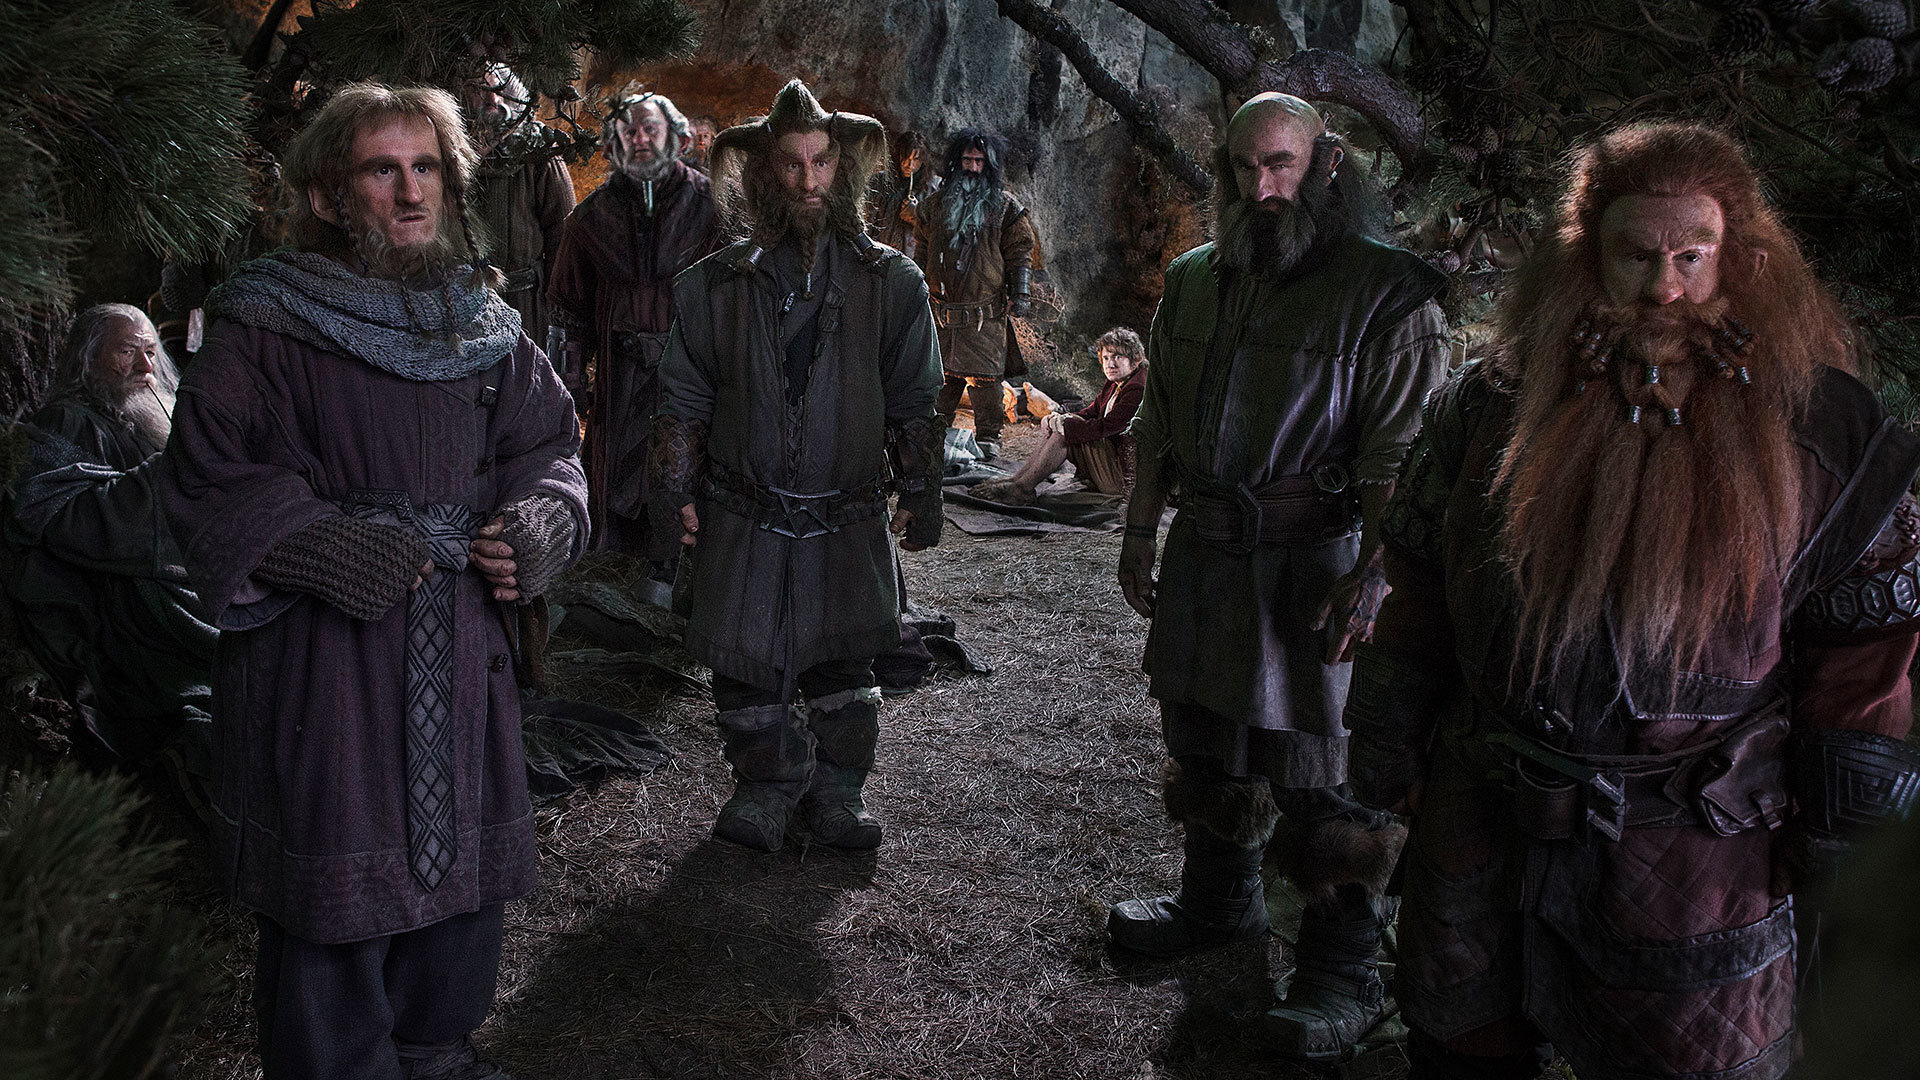 Awesome The Hobbit: An Unexpected Journey free wallpaper ID:463969 for hd 1920x1080 computer